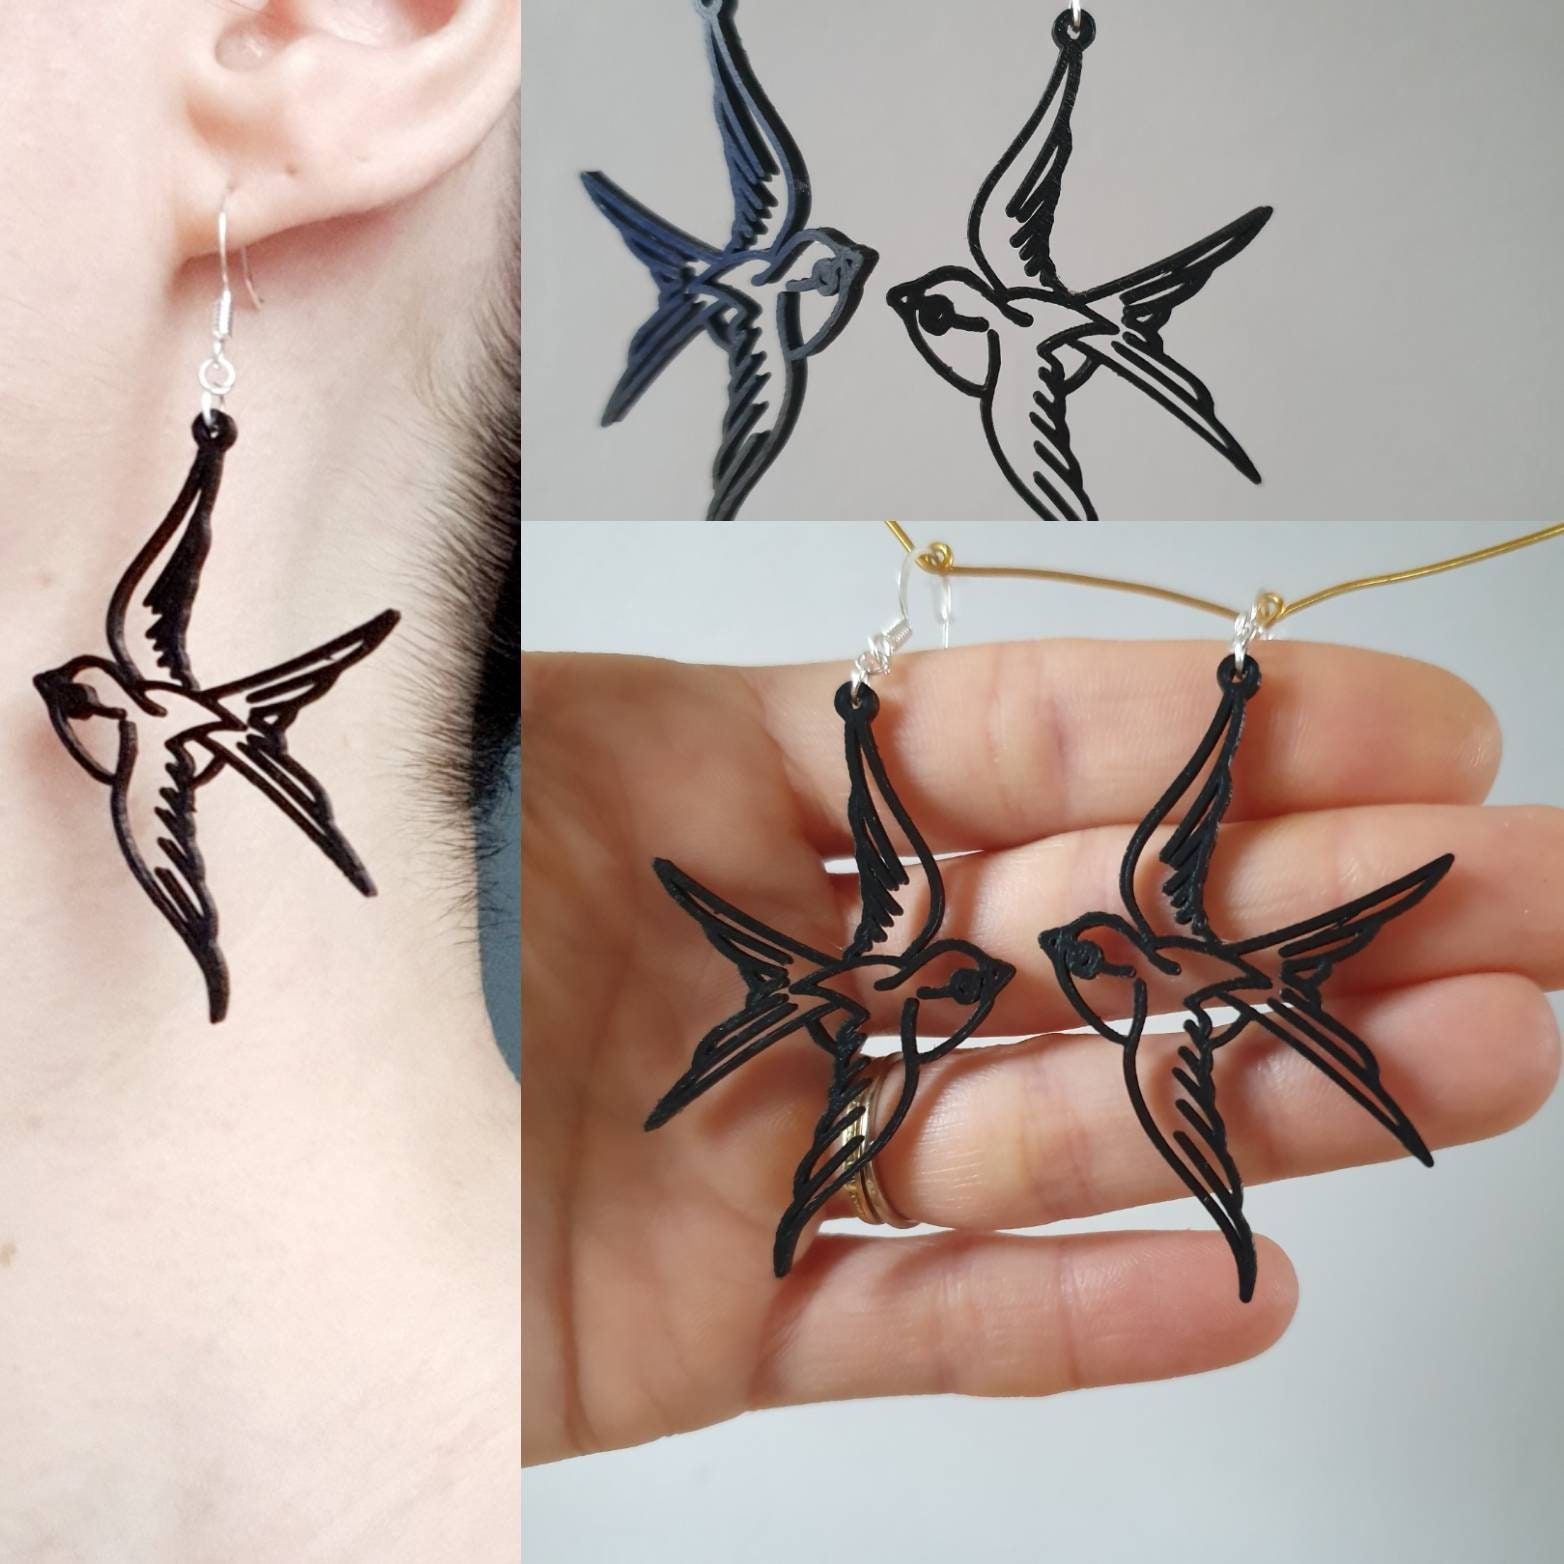 Your Next Tattoo Made with a 3D Printer  Shapeways Blog